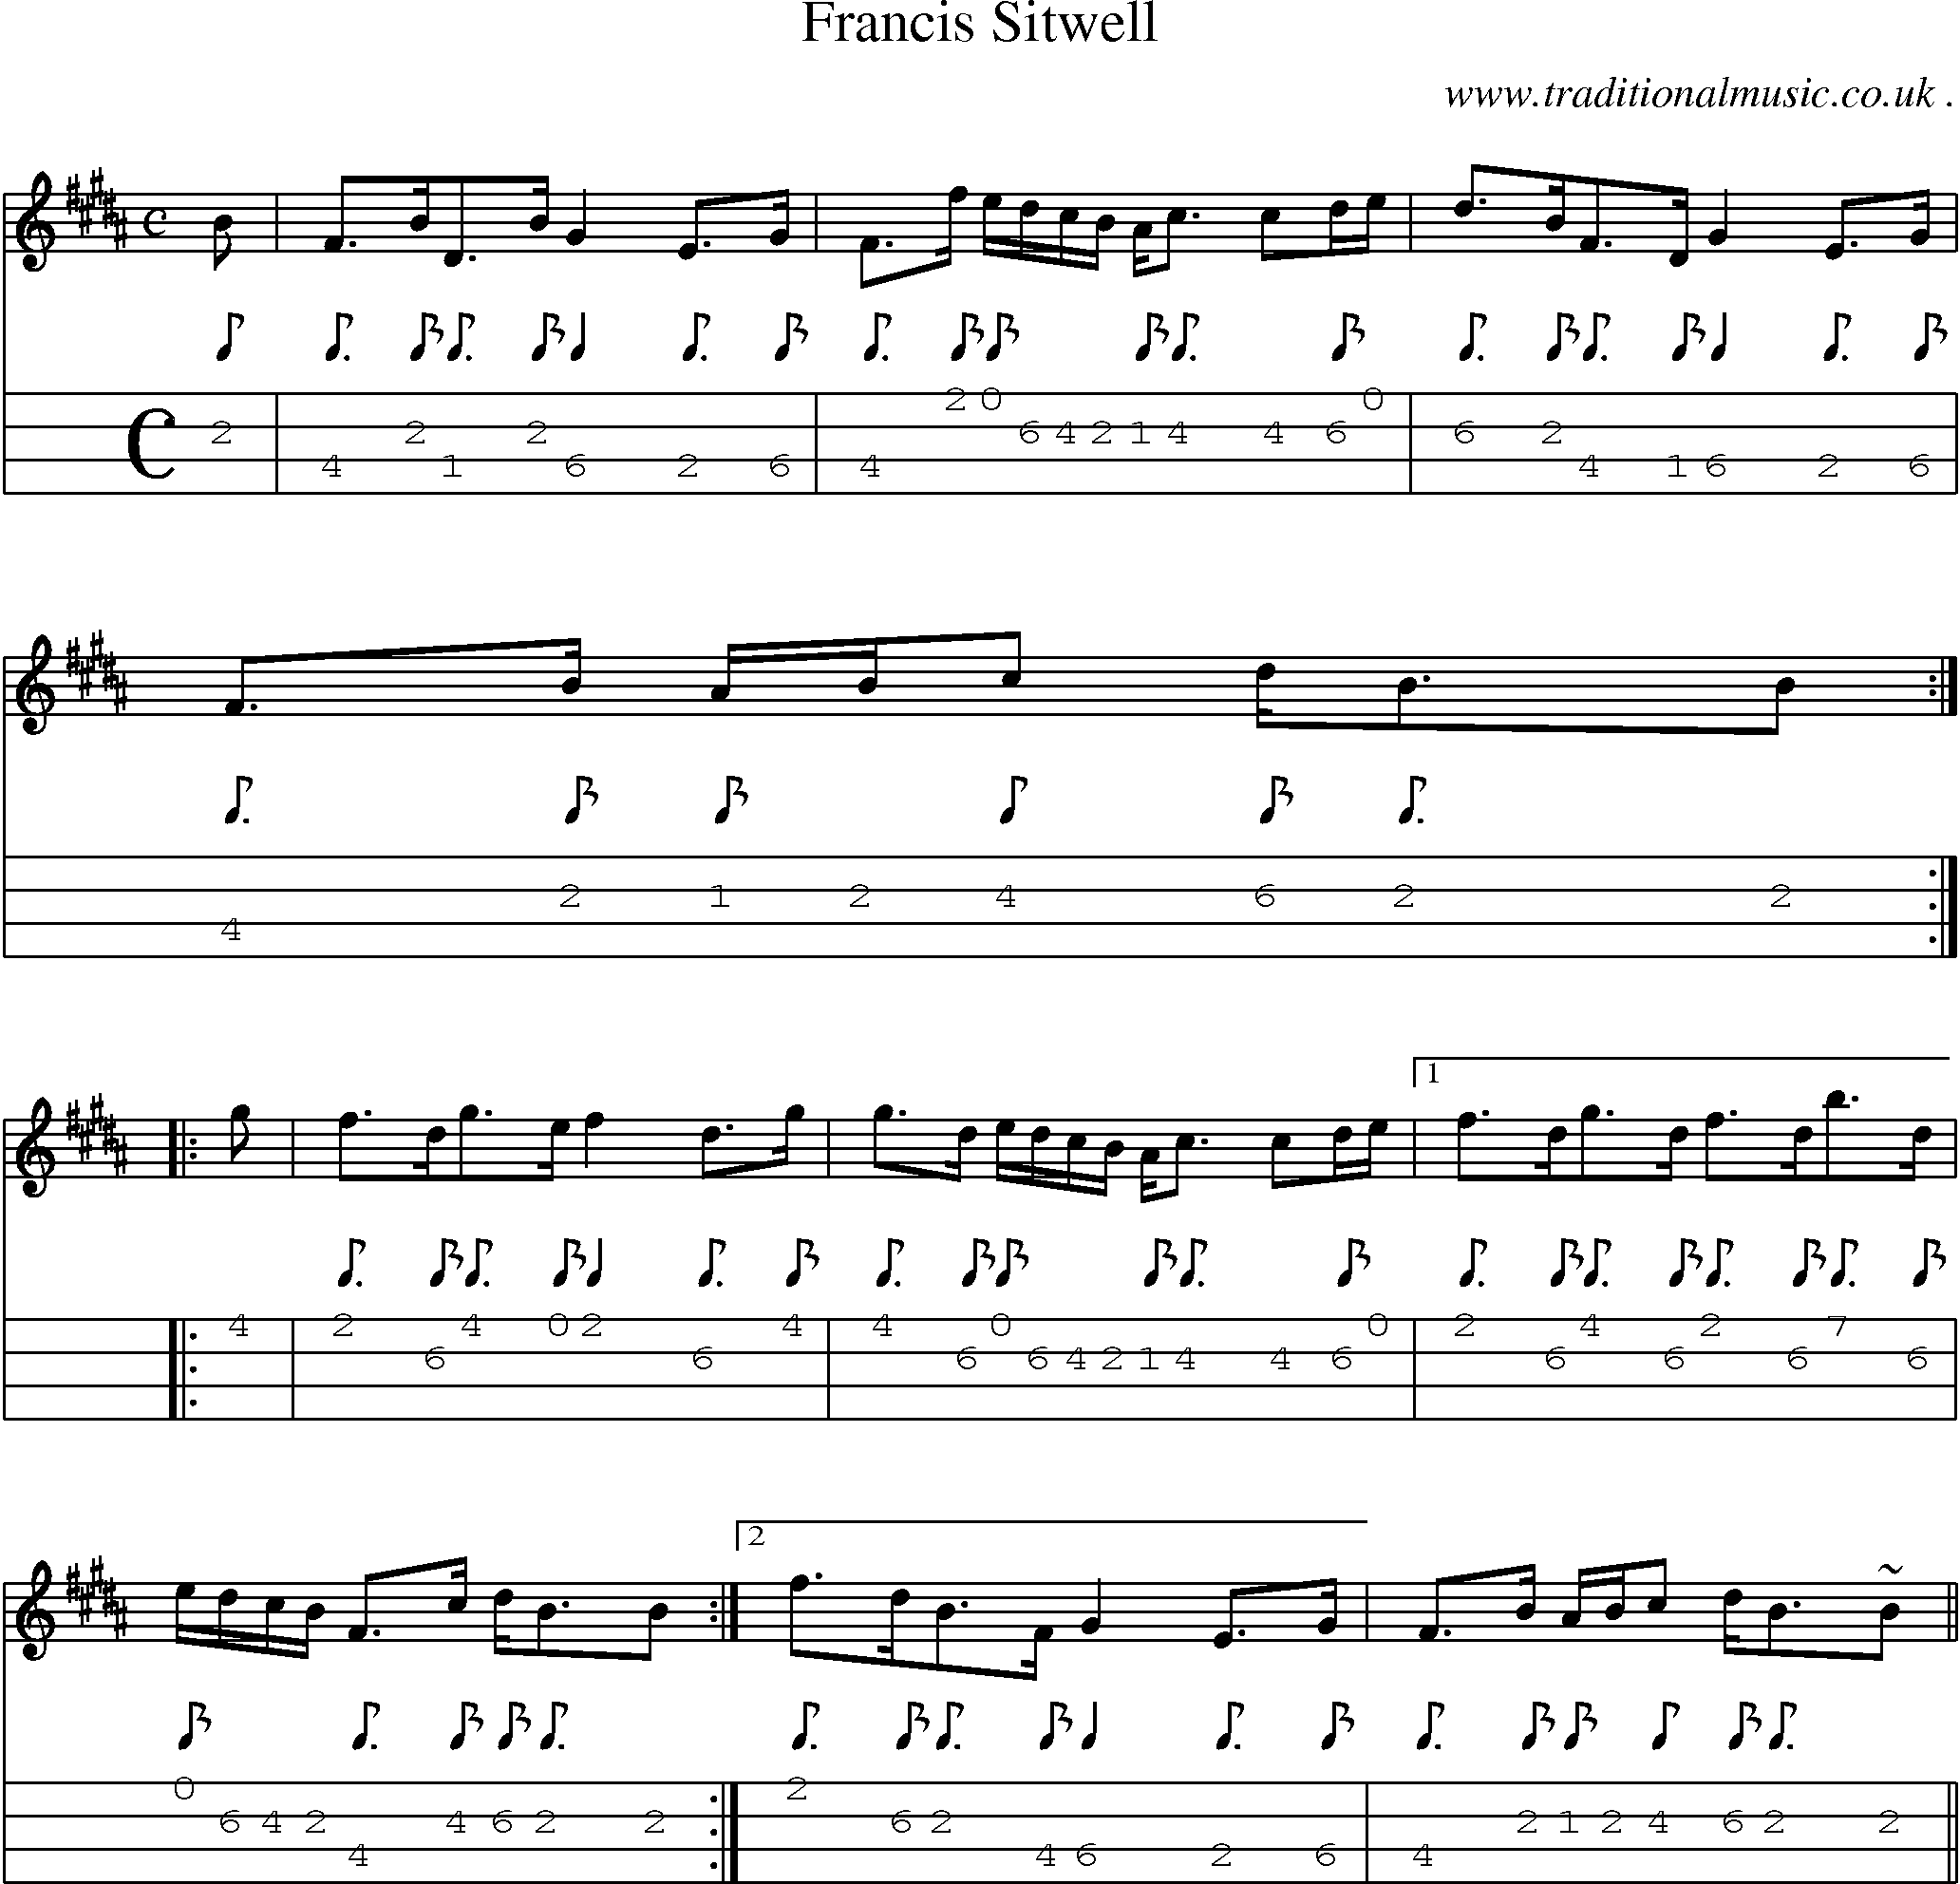 Sheet-music  score, Chords and Mandolin Tabs for Francis Sitwell